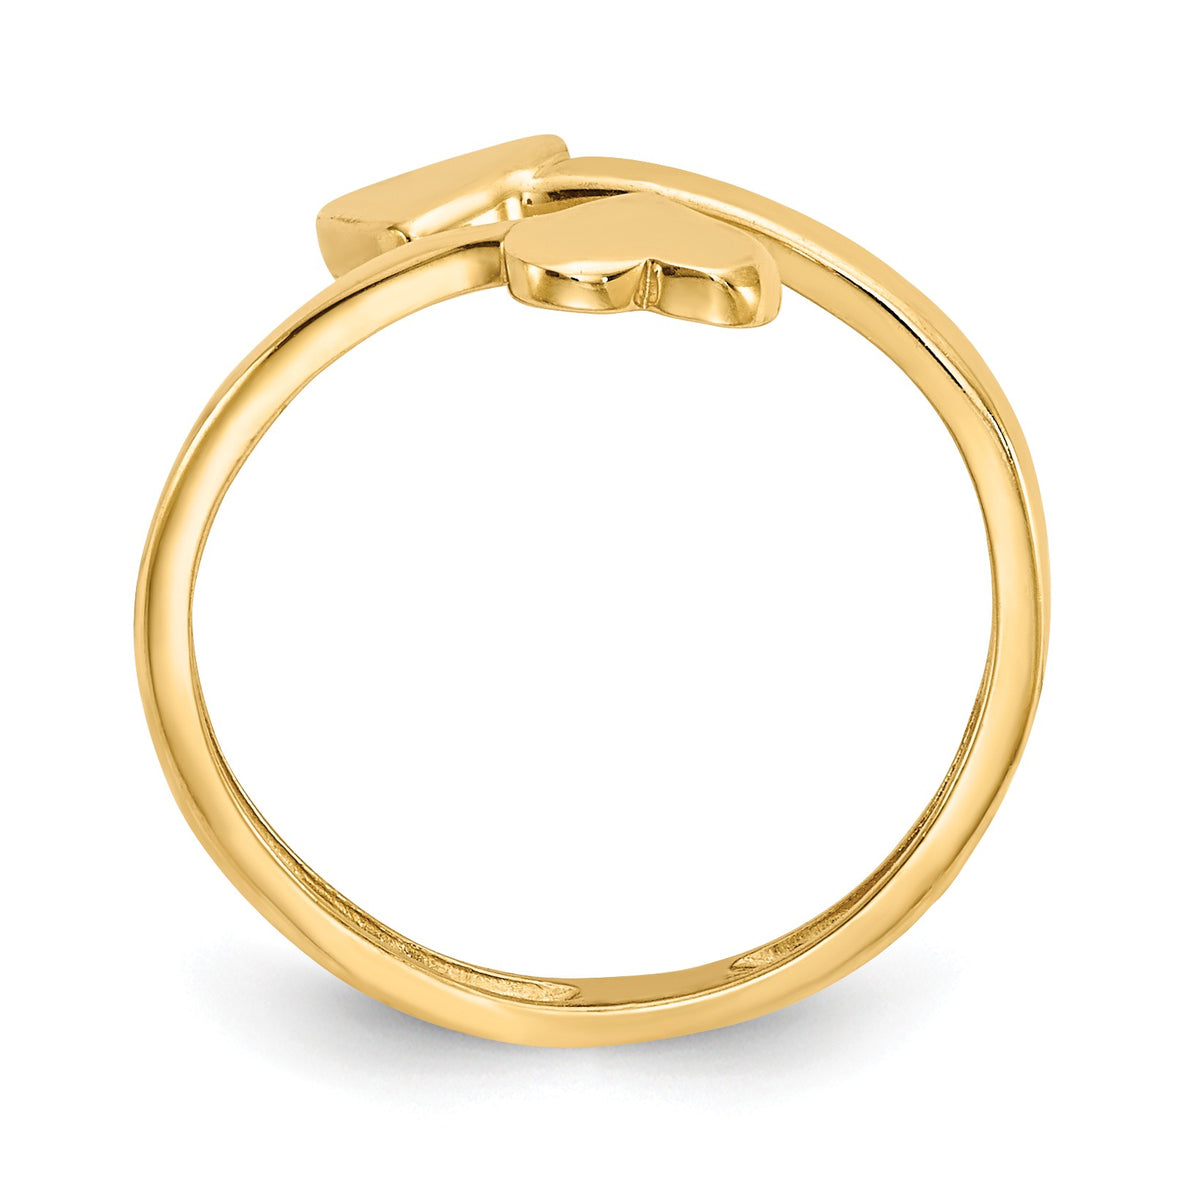 Alternate view of the Twin Heart Adjustable Toe Ring in 14 Karat Gold by The Black Bow Jewelry Co.